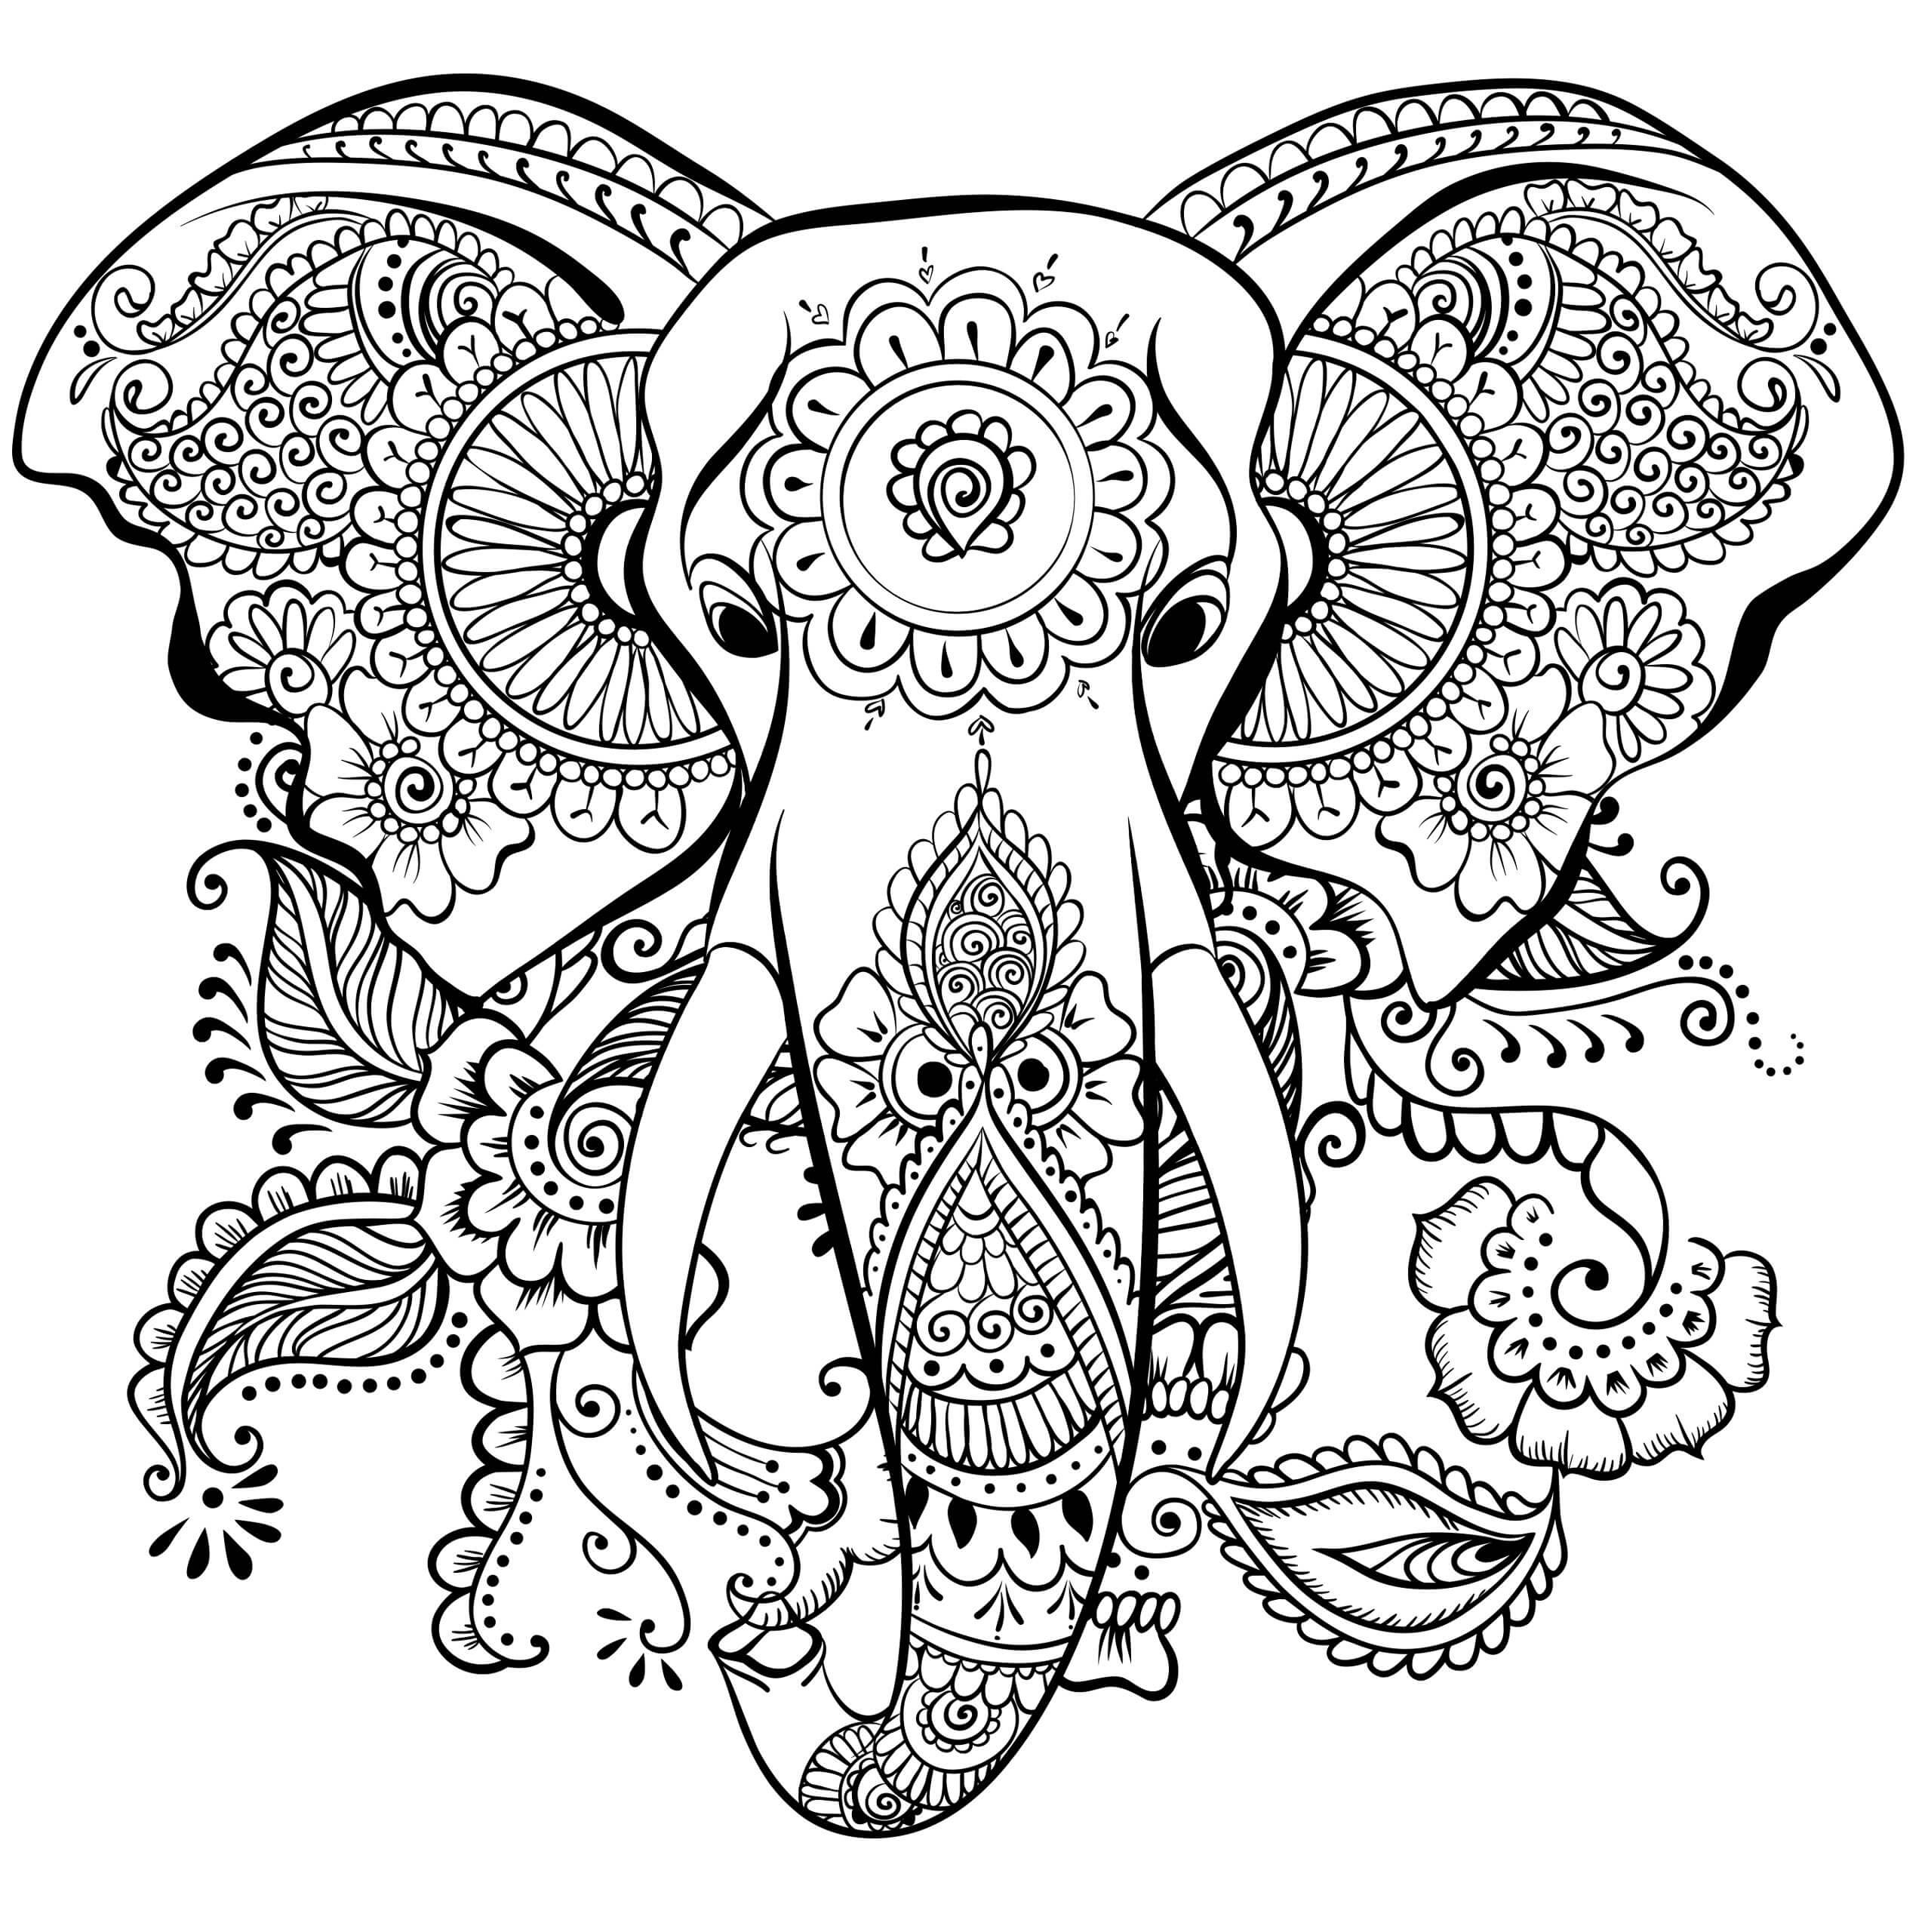 Hard Kids Coloring Pages
 Coloring Pages For Adults Difficult Animals 7